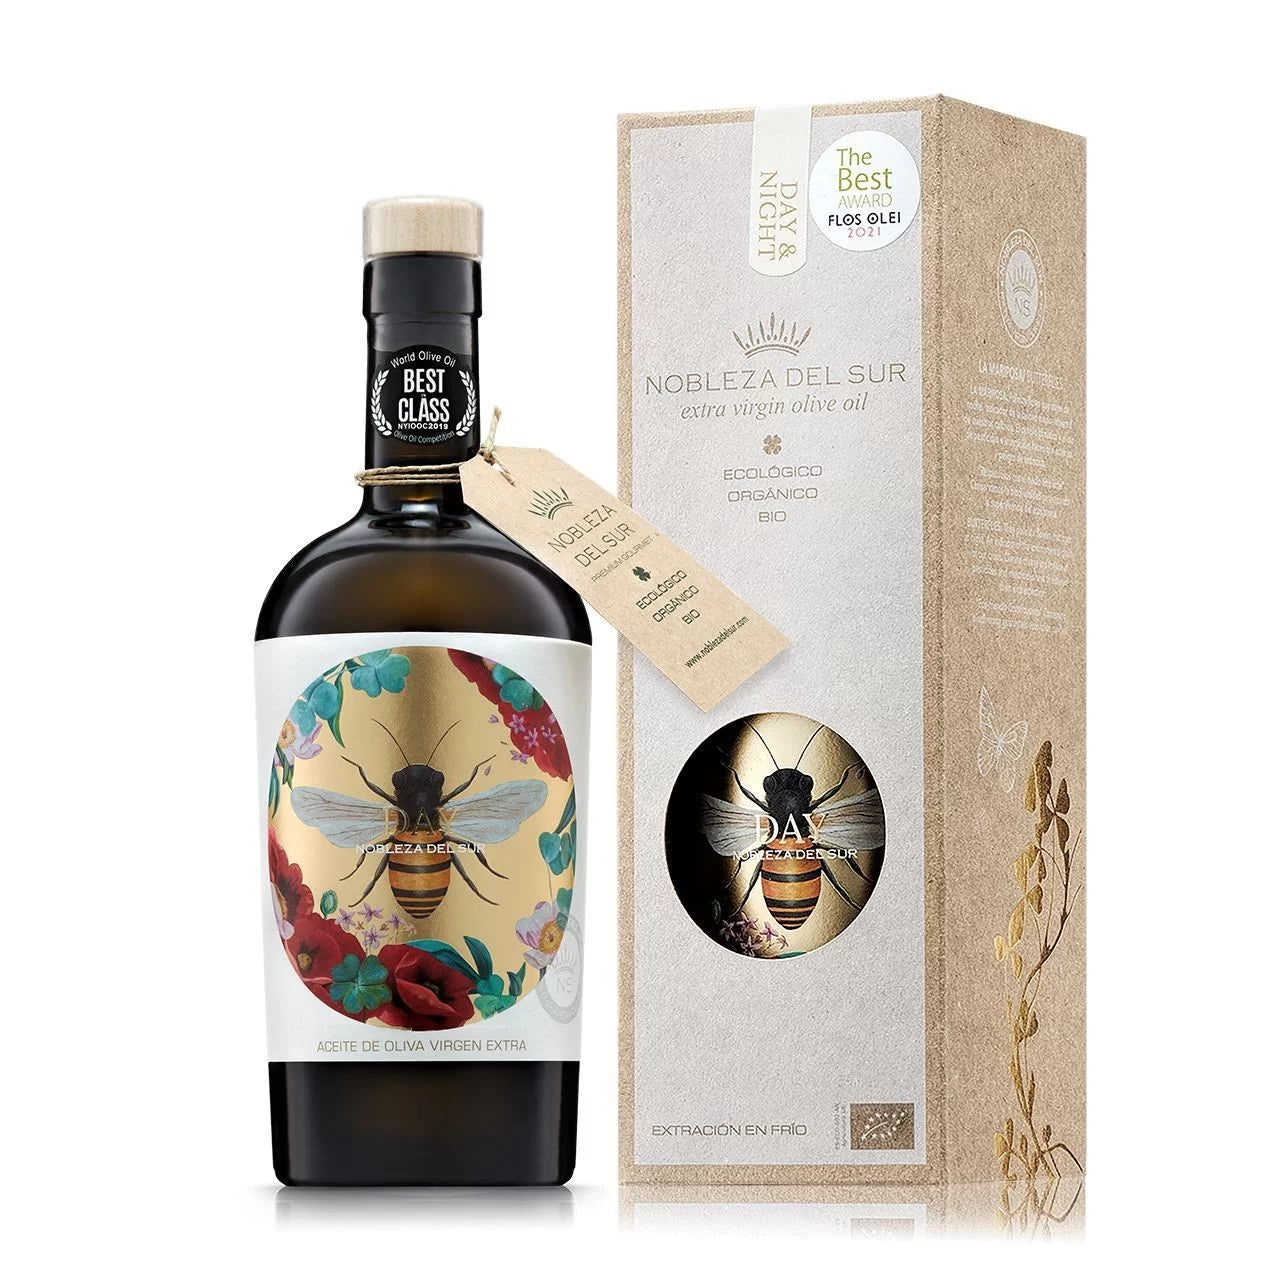 Nobleza del Sur Early Harvest "Day" Picual Organic  Extra Virgin Olive Oil 500ml in Gift Box